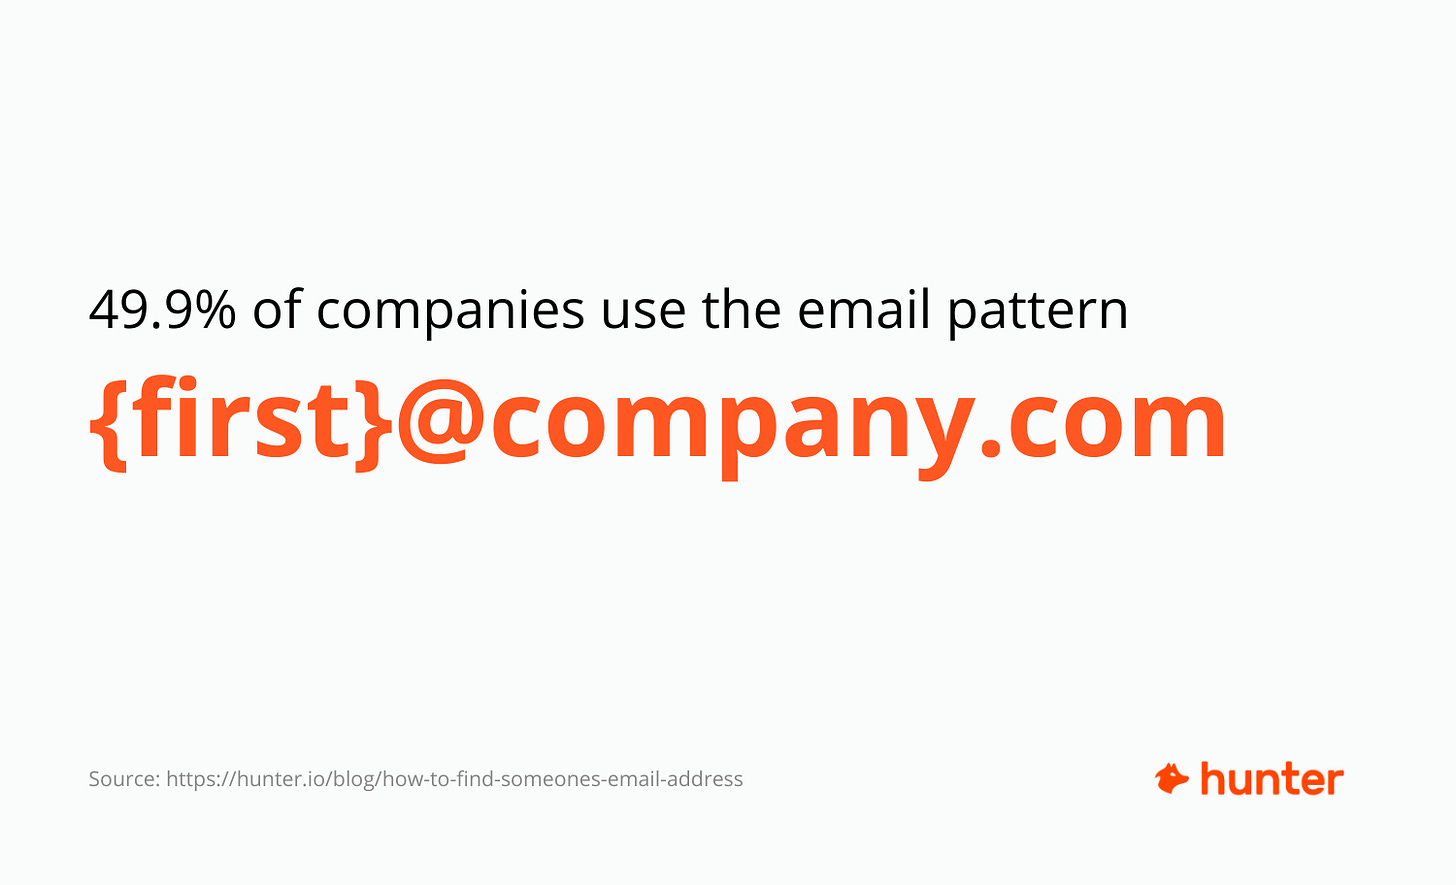 Most common email pattern stats by hunter